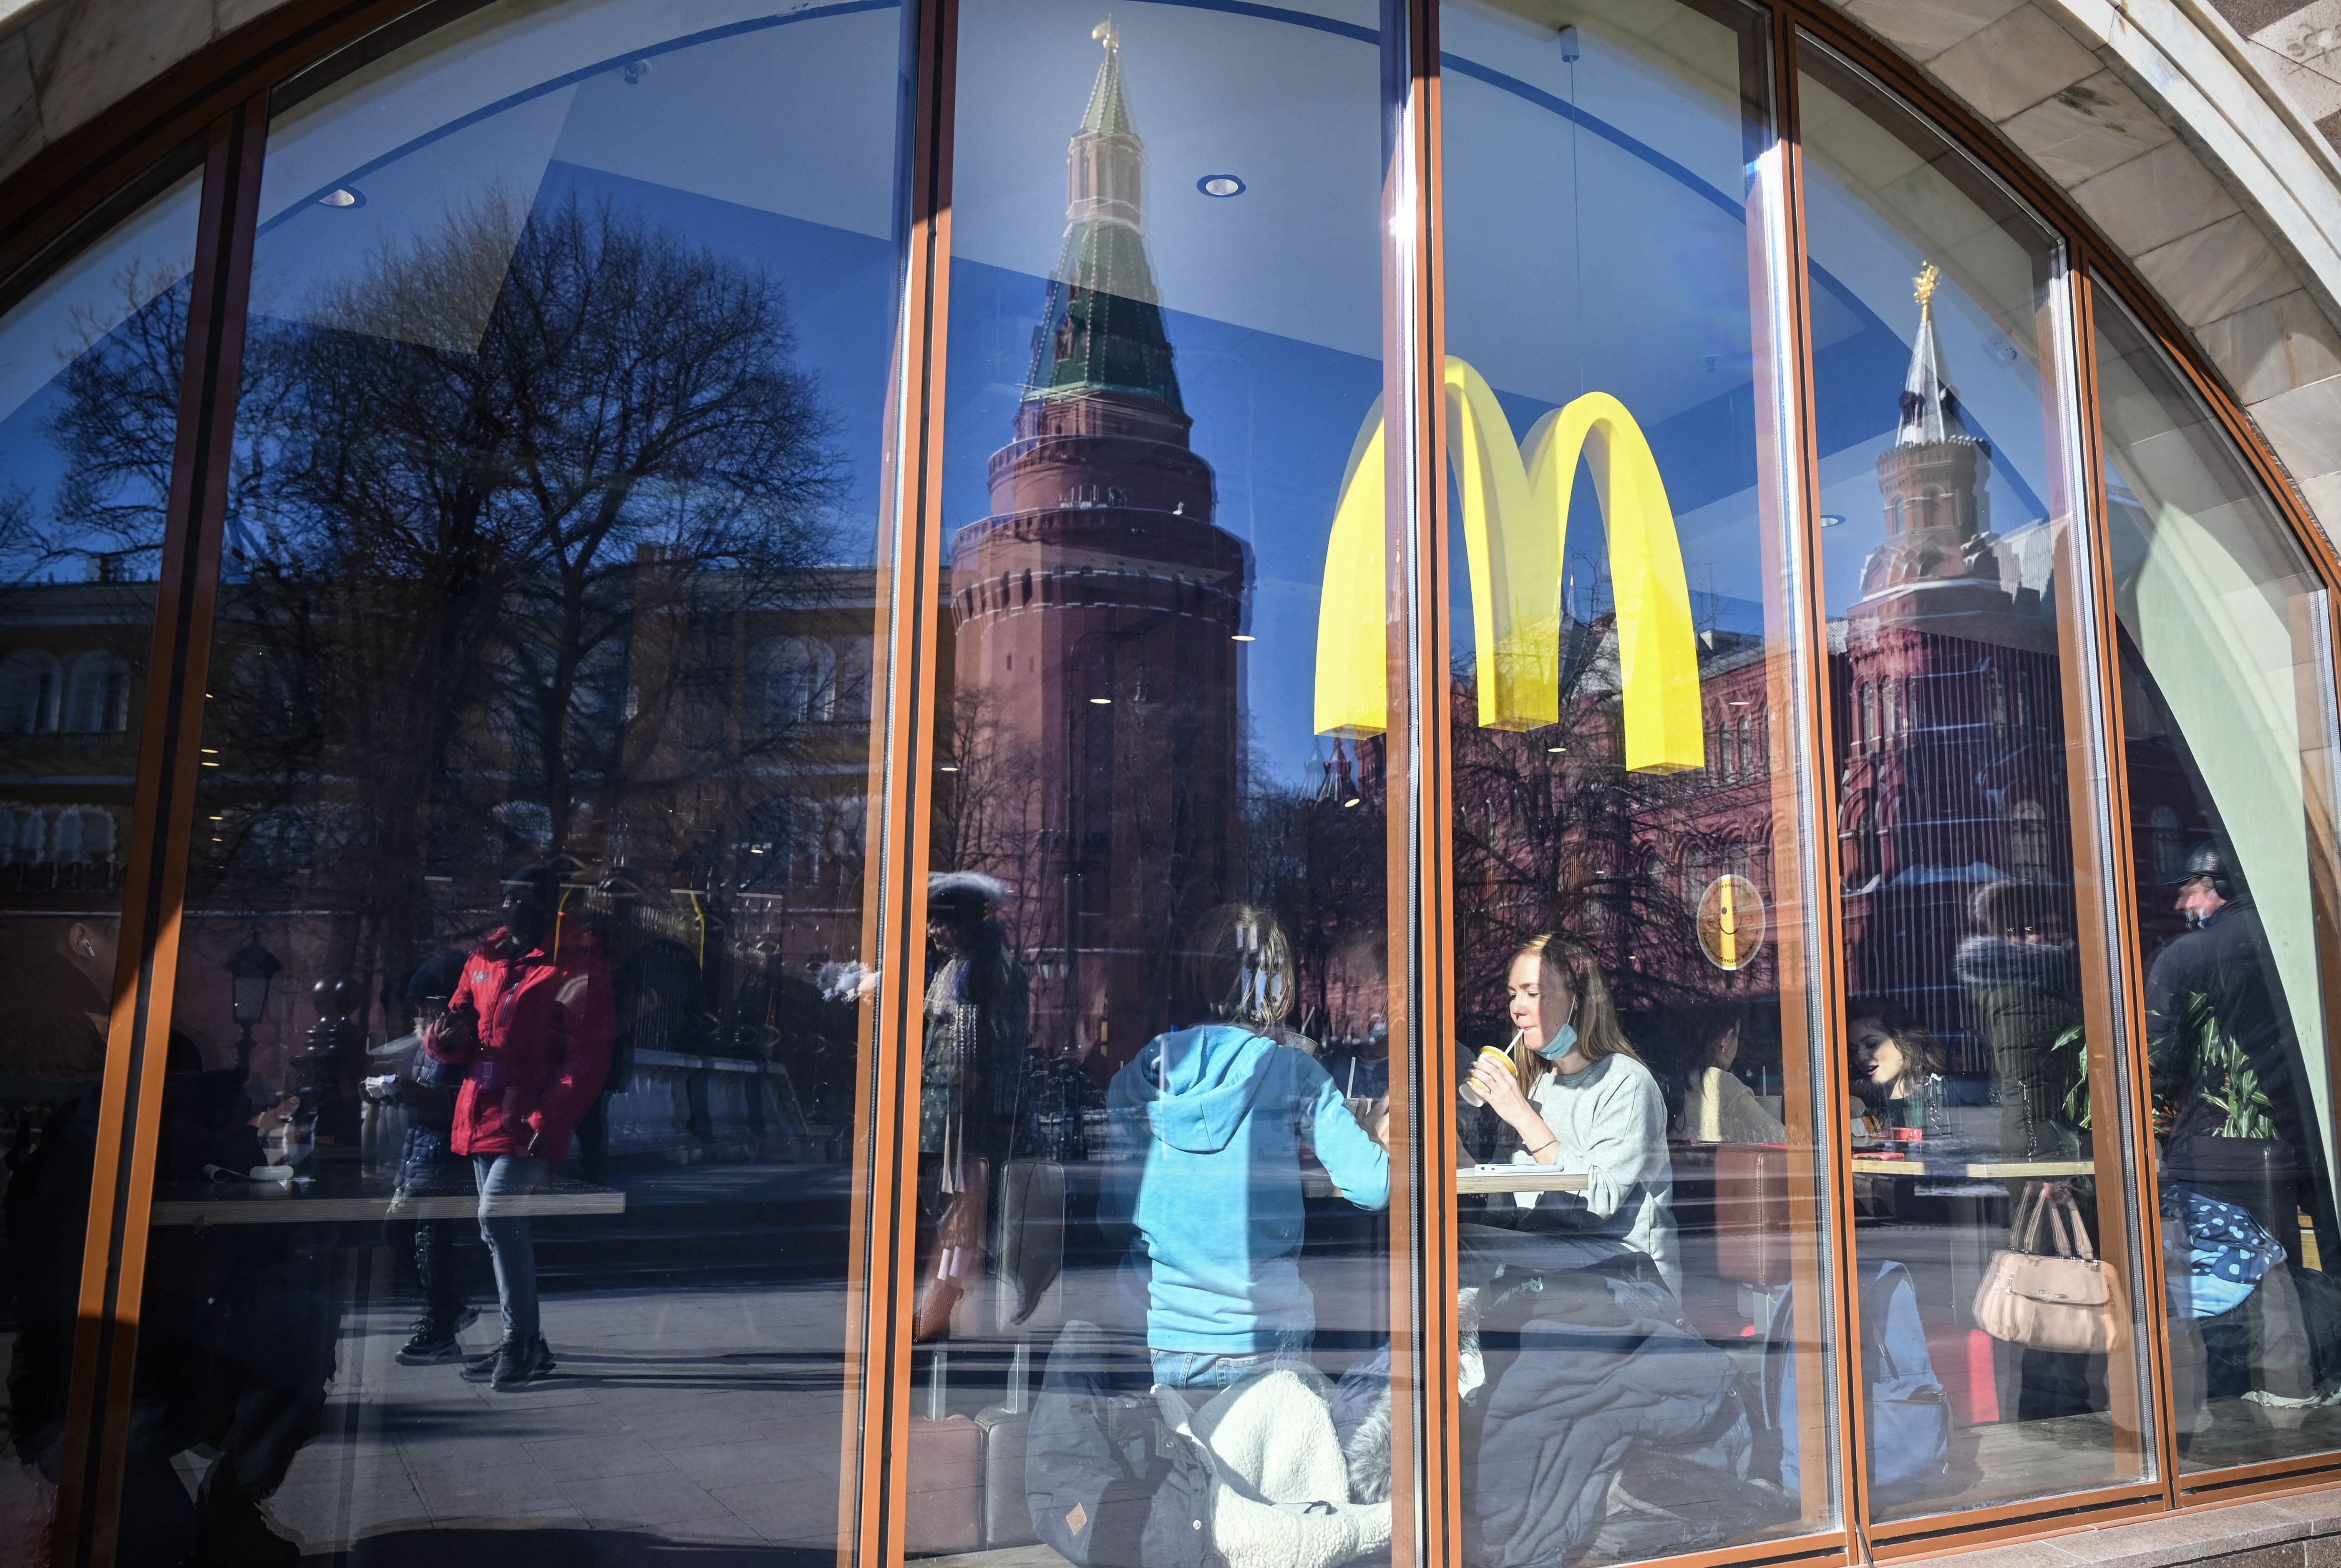 Some Russians have been hoarding McDonald’s burgers while others have been selling them for a profit